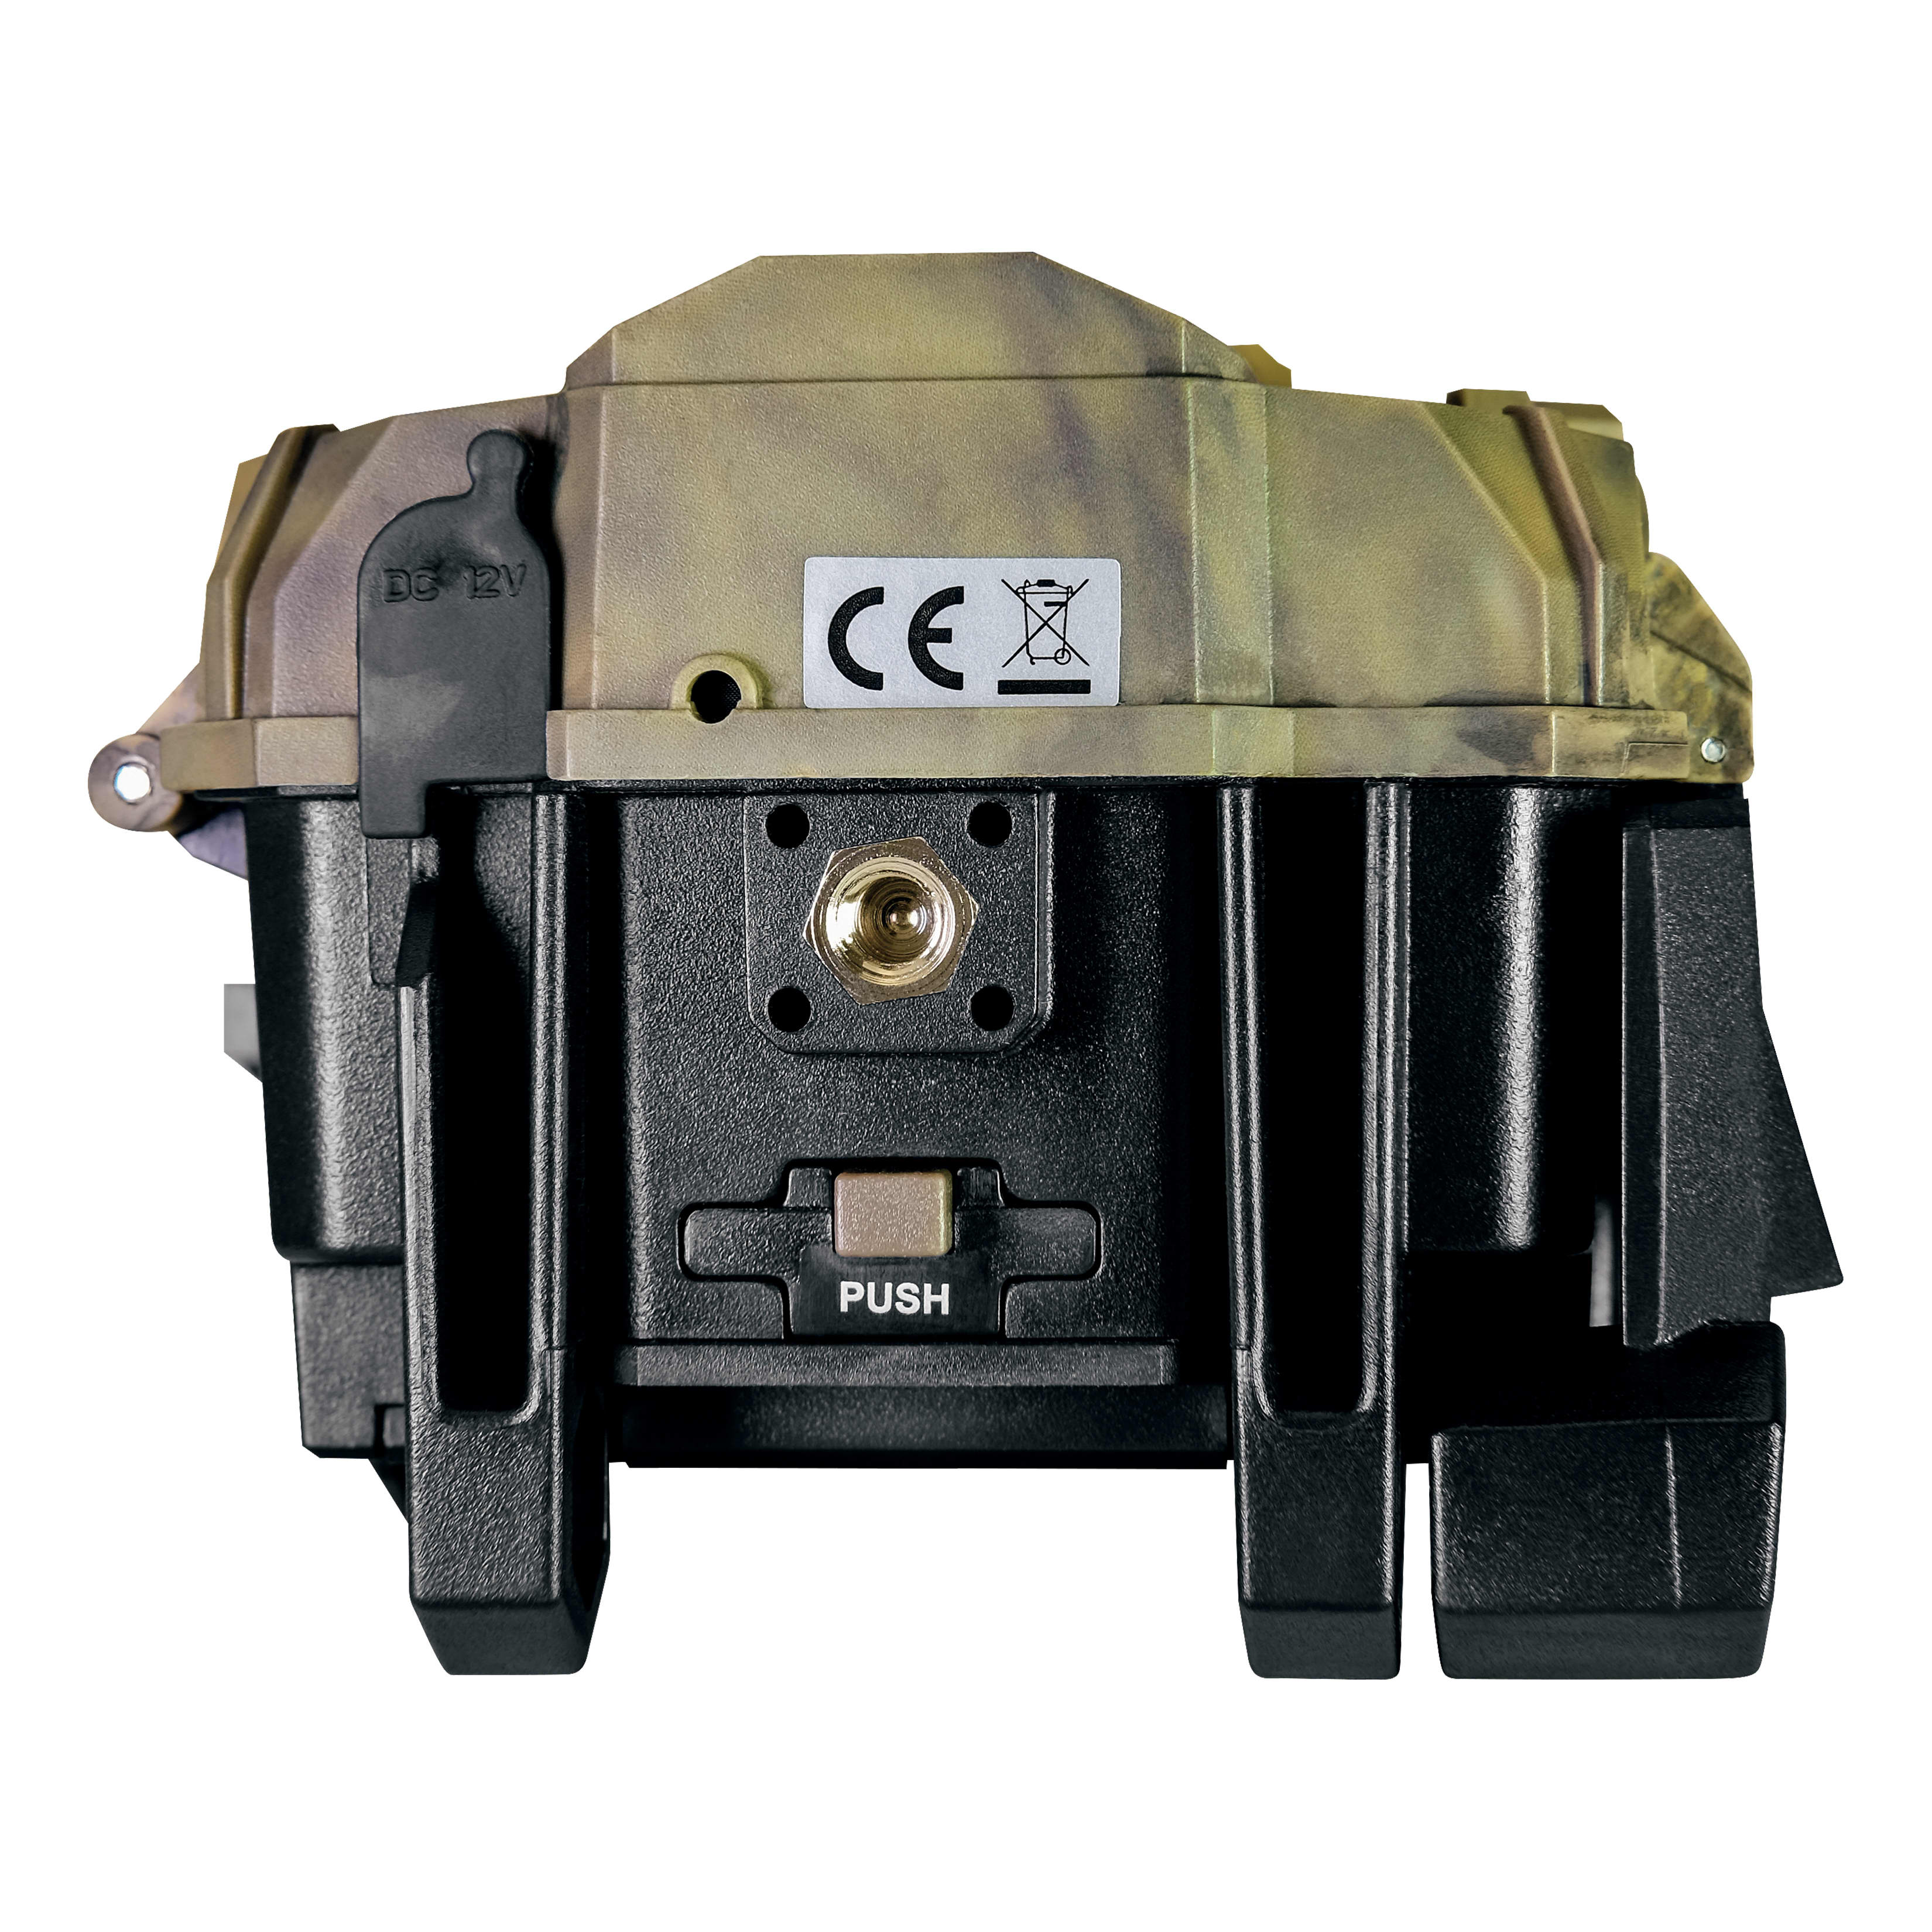 SPYPOINT® LINK-S Solar LTE Cellular Trail Camera - Bottom View